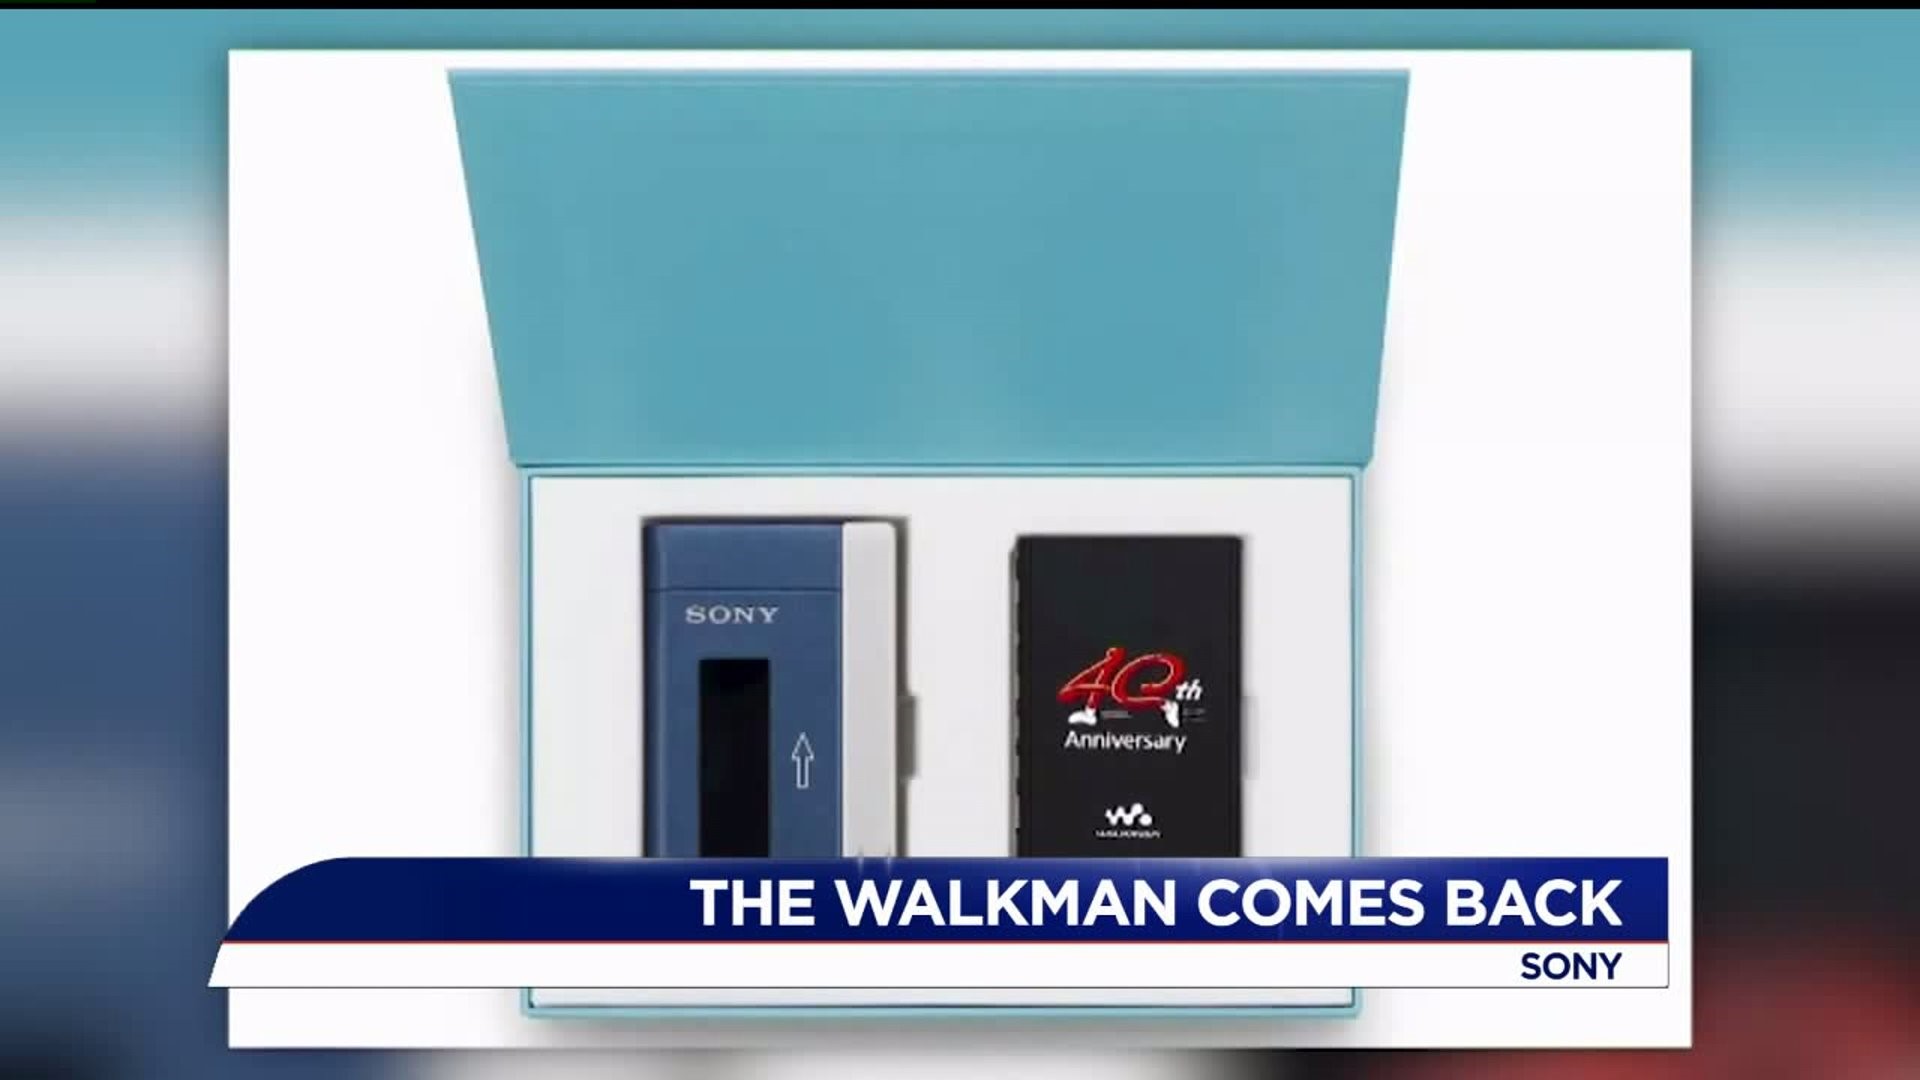 Sony releases a Walkman for its 40th anniversary